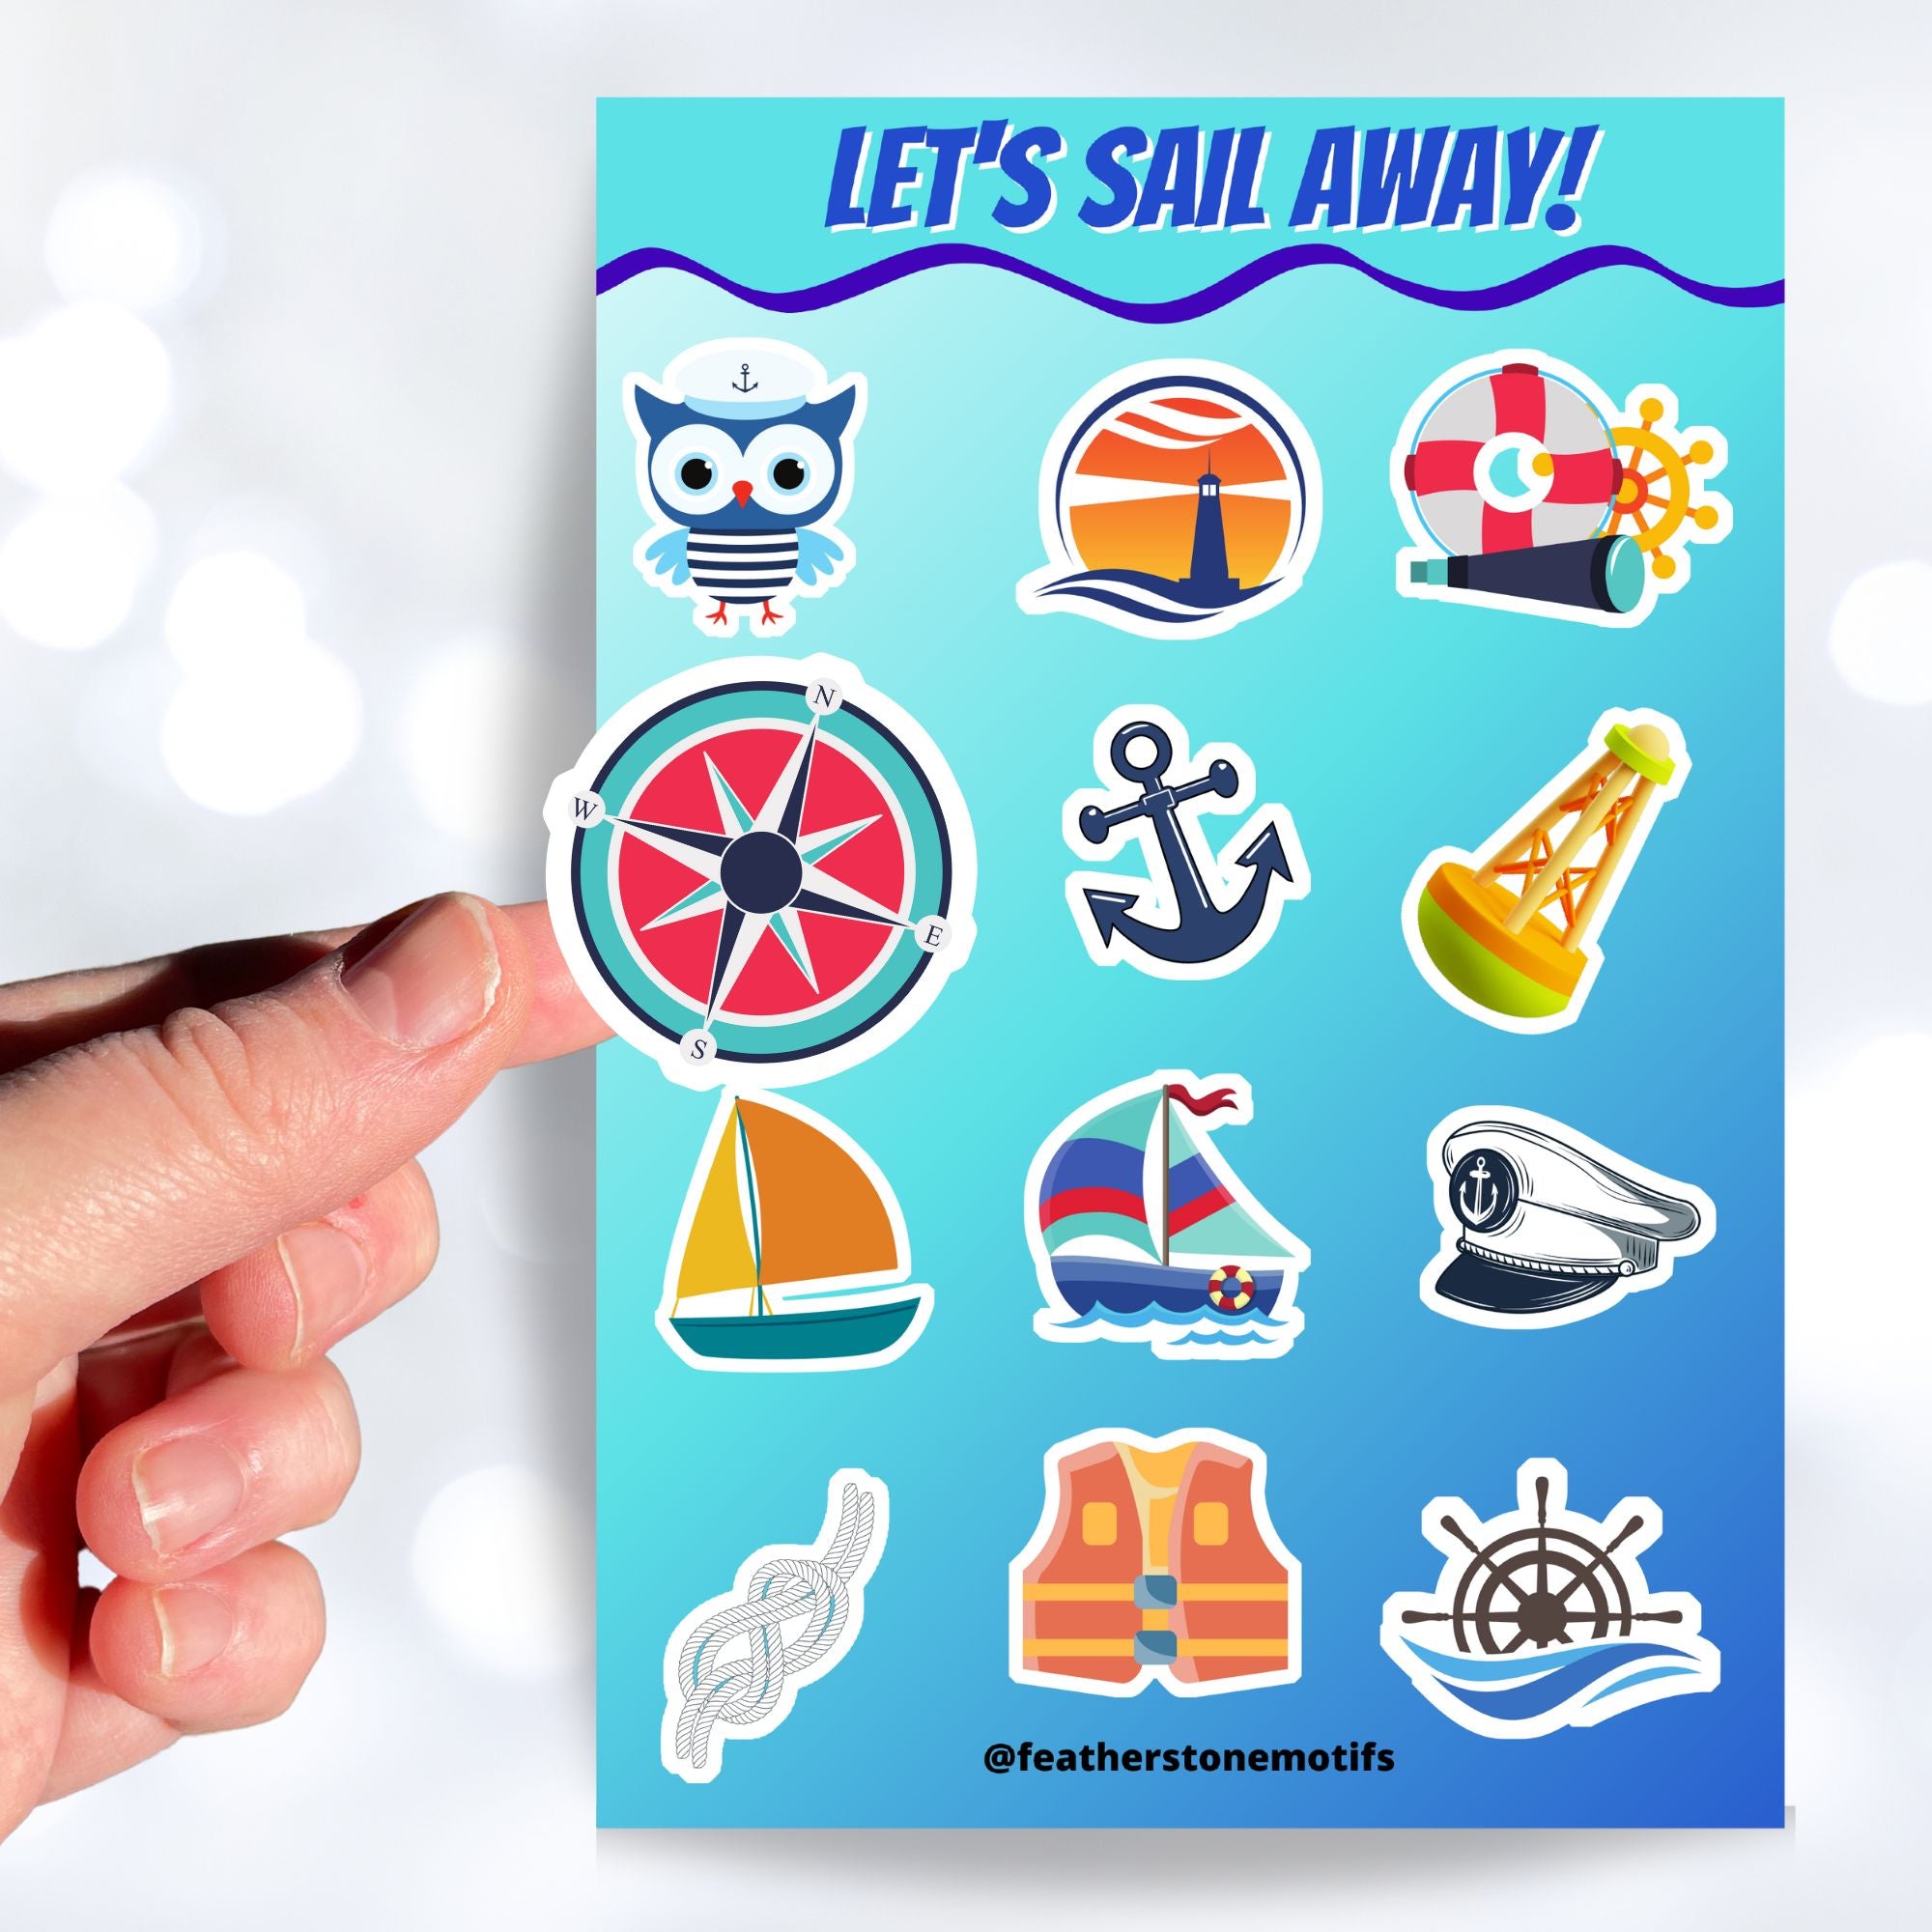 Permission to come aboard and sail away? This sticker sheet has twelve different sailing designs perfect for any captain or first mate! This image shows a hand holding a compass sticker above the sticker sheet.